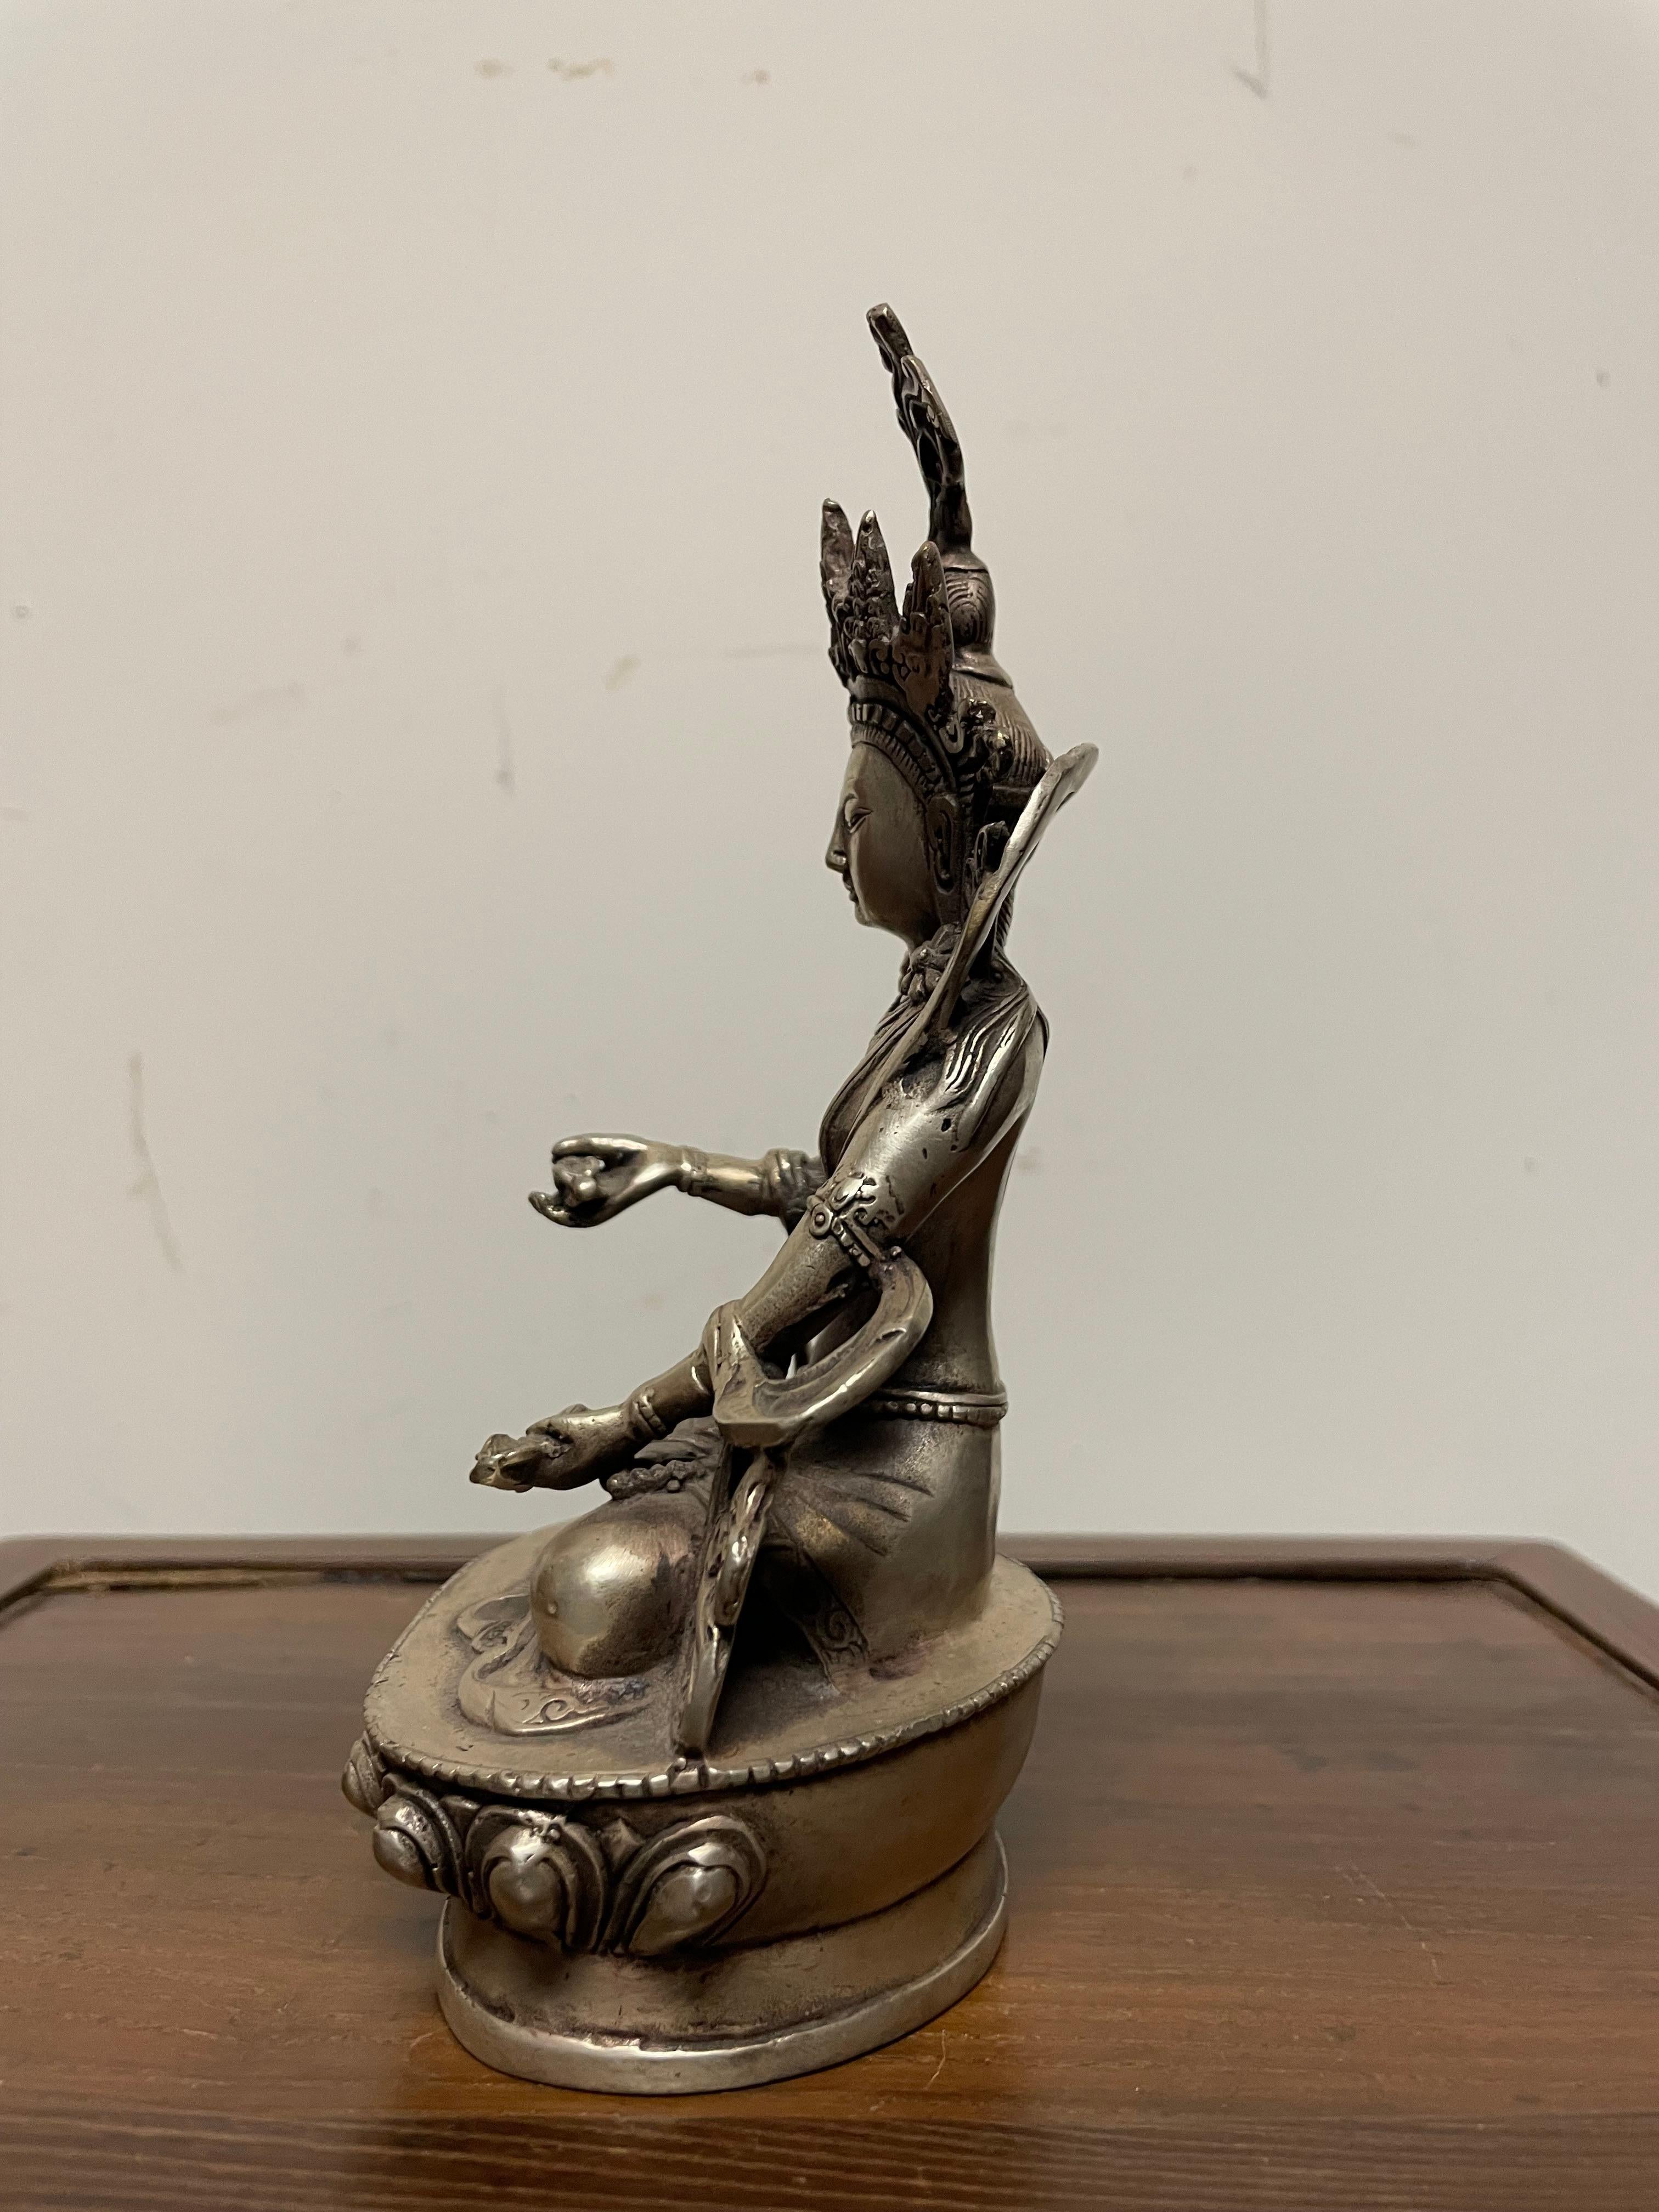 Indian Silvered Bronze Buddhist Deity Vajradhara Seated in Lotus Position For Sale 4